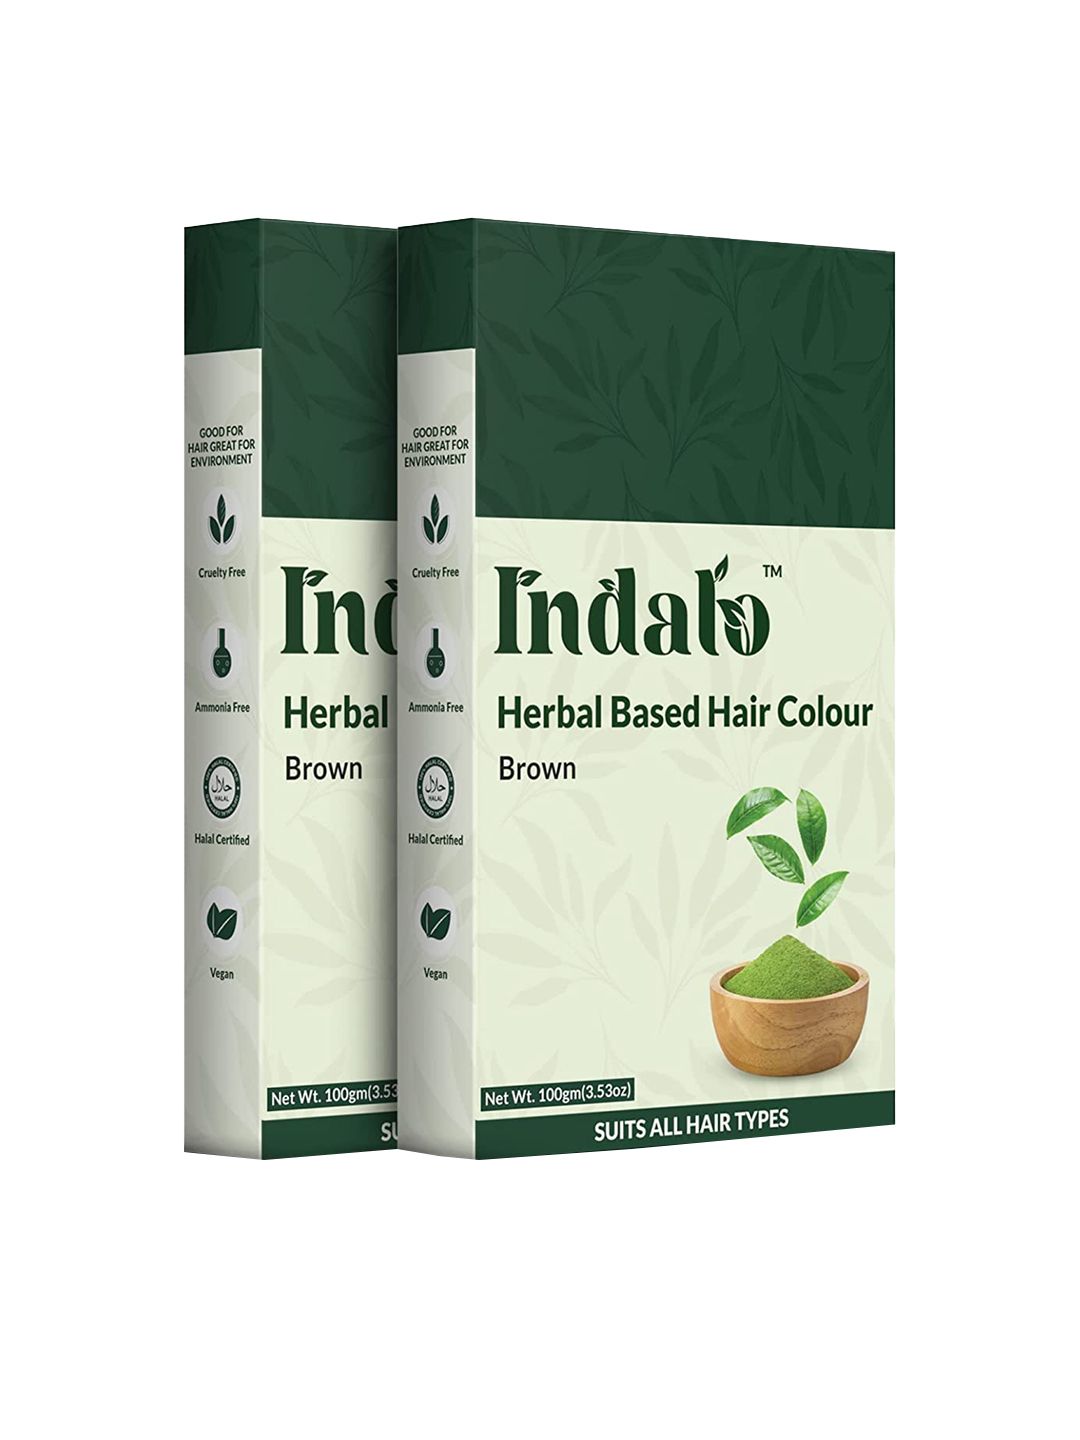 INDALO Set of 2 No Ammonia Herbal Based Hair Colour with Amla and Brahmi 100g Each - Brown Price in India